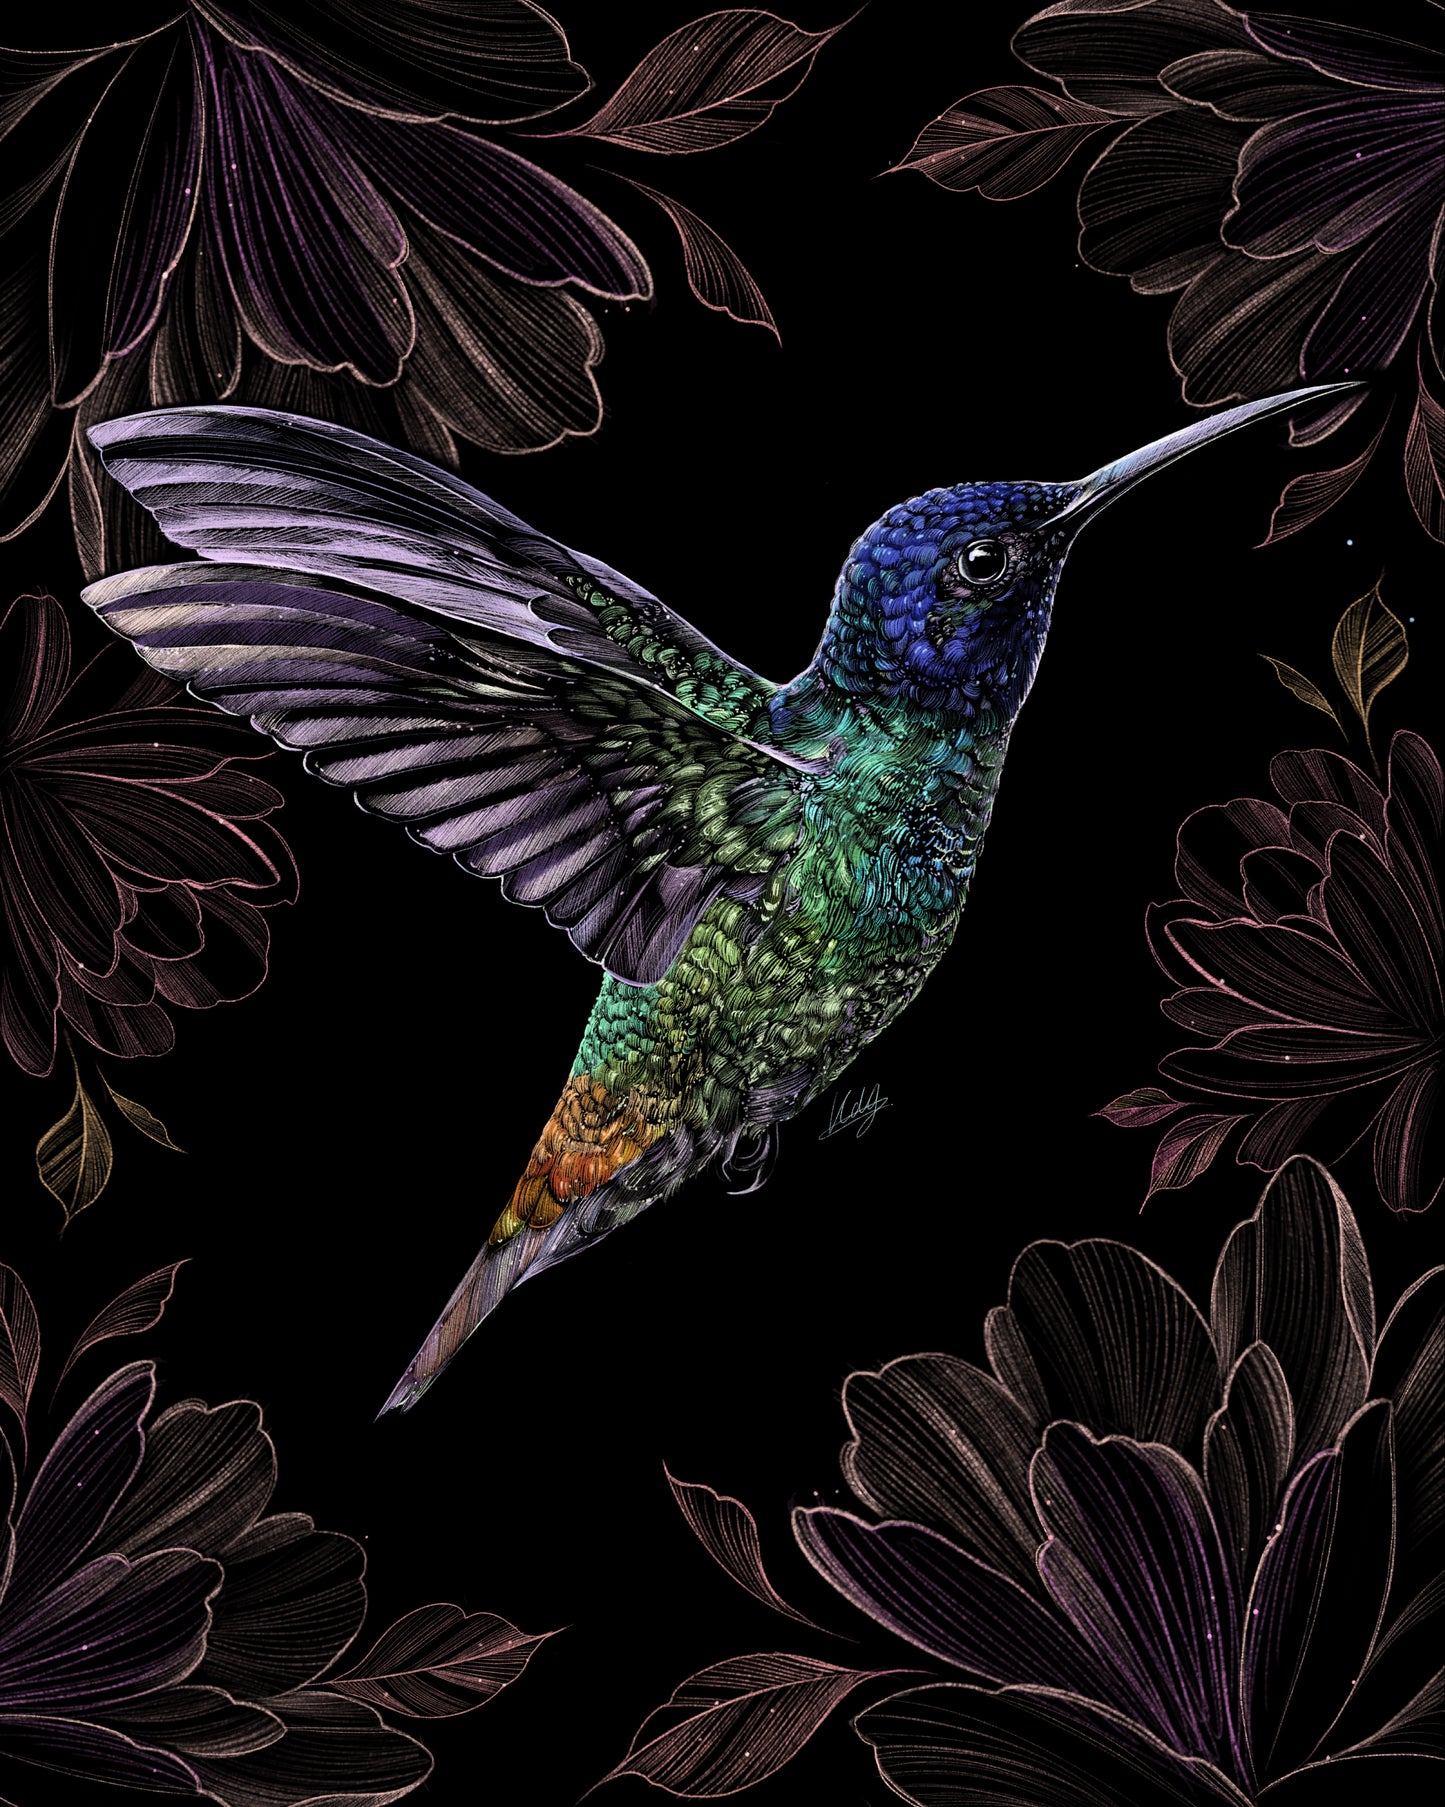 Multi-coloured hummingbird art surrounded by tattoo-inspired florals